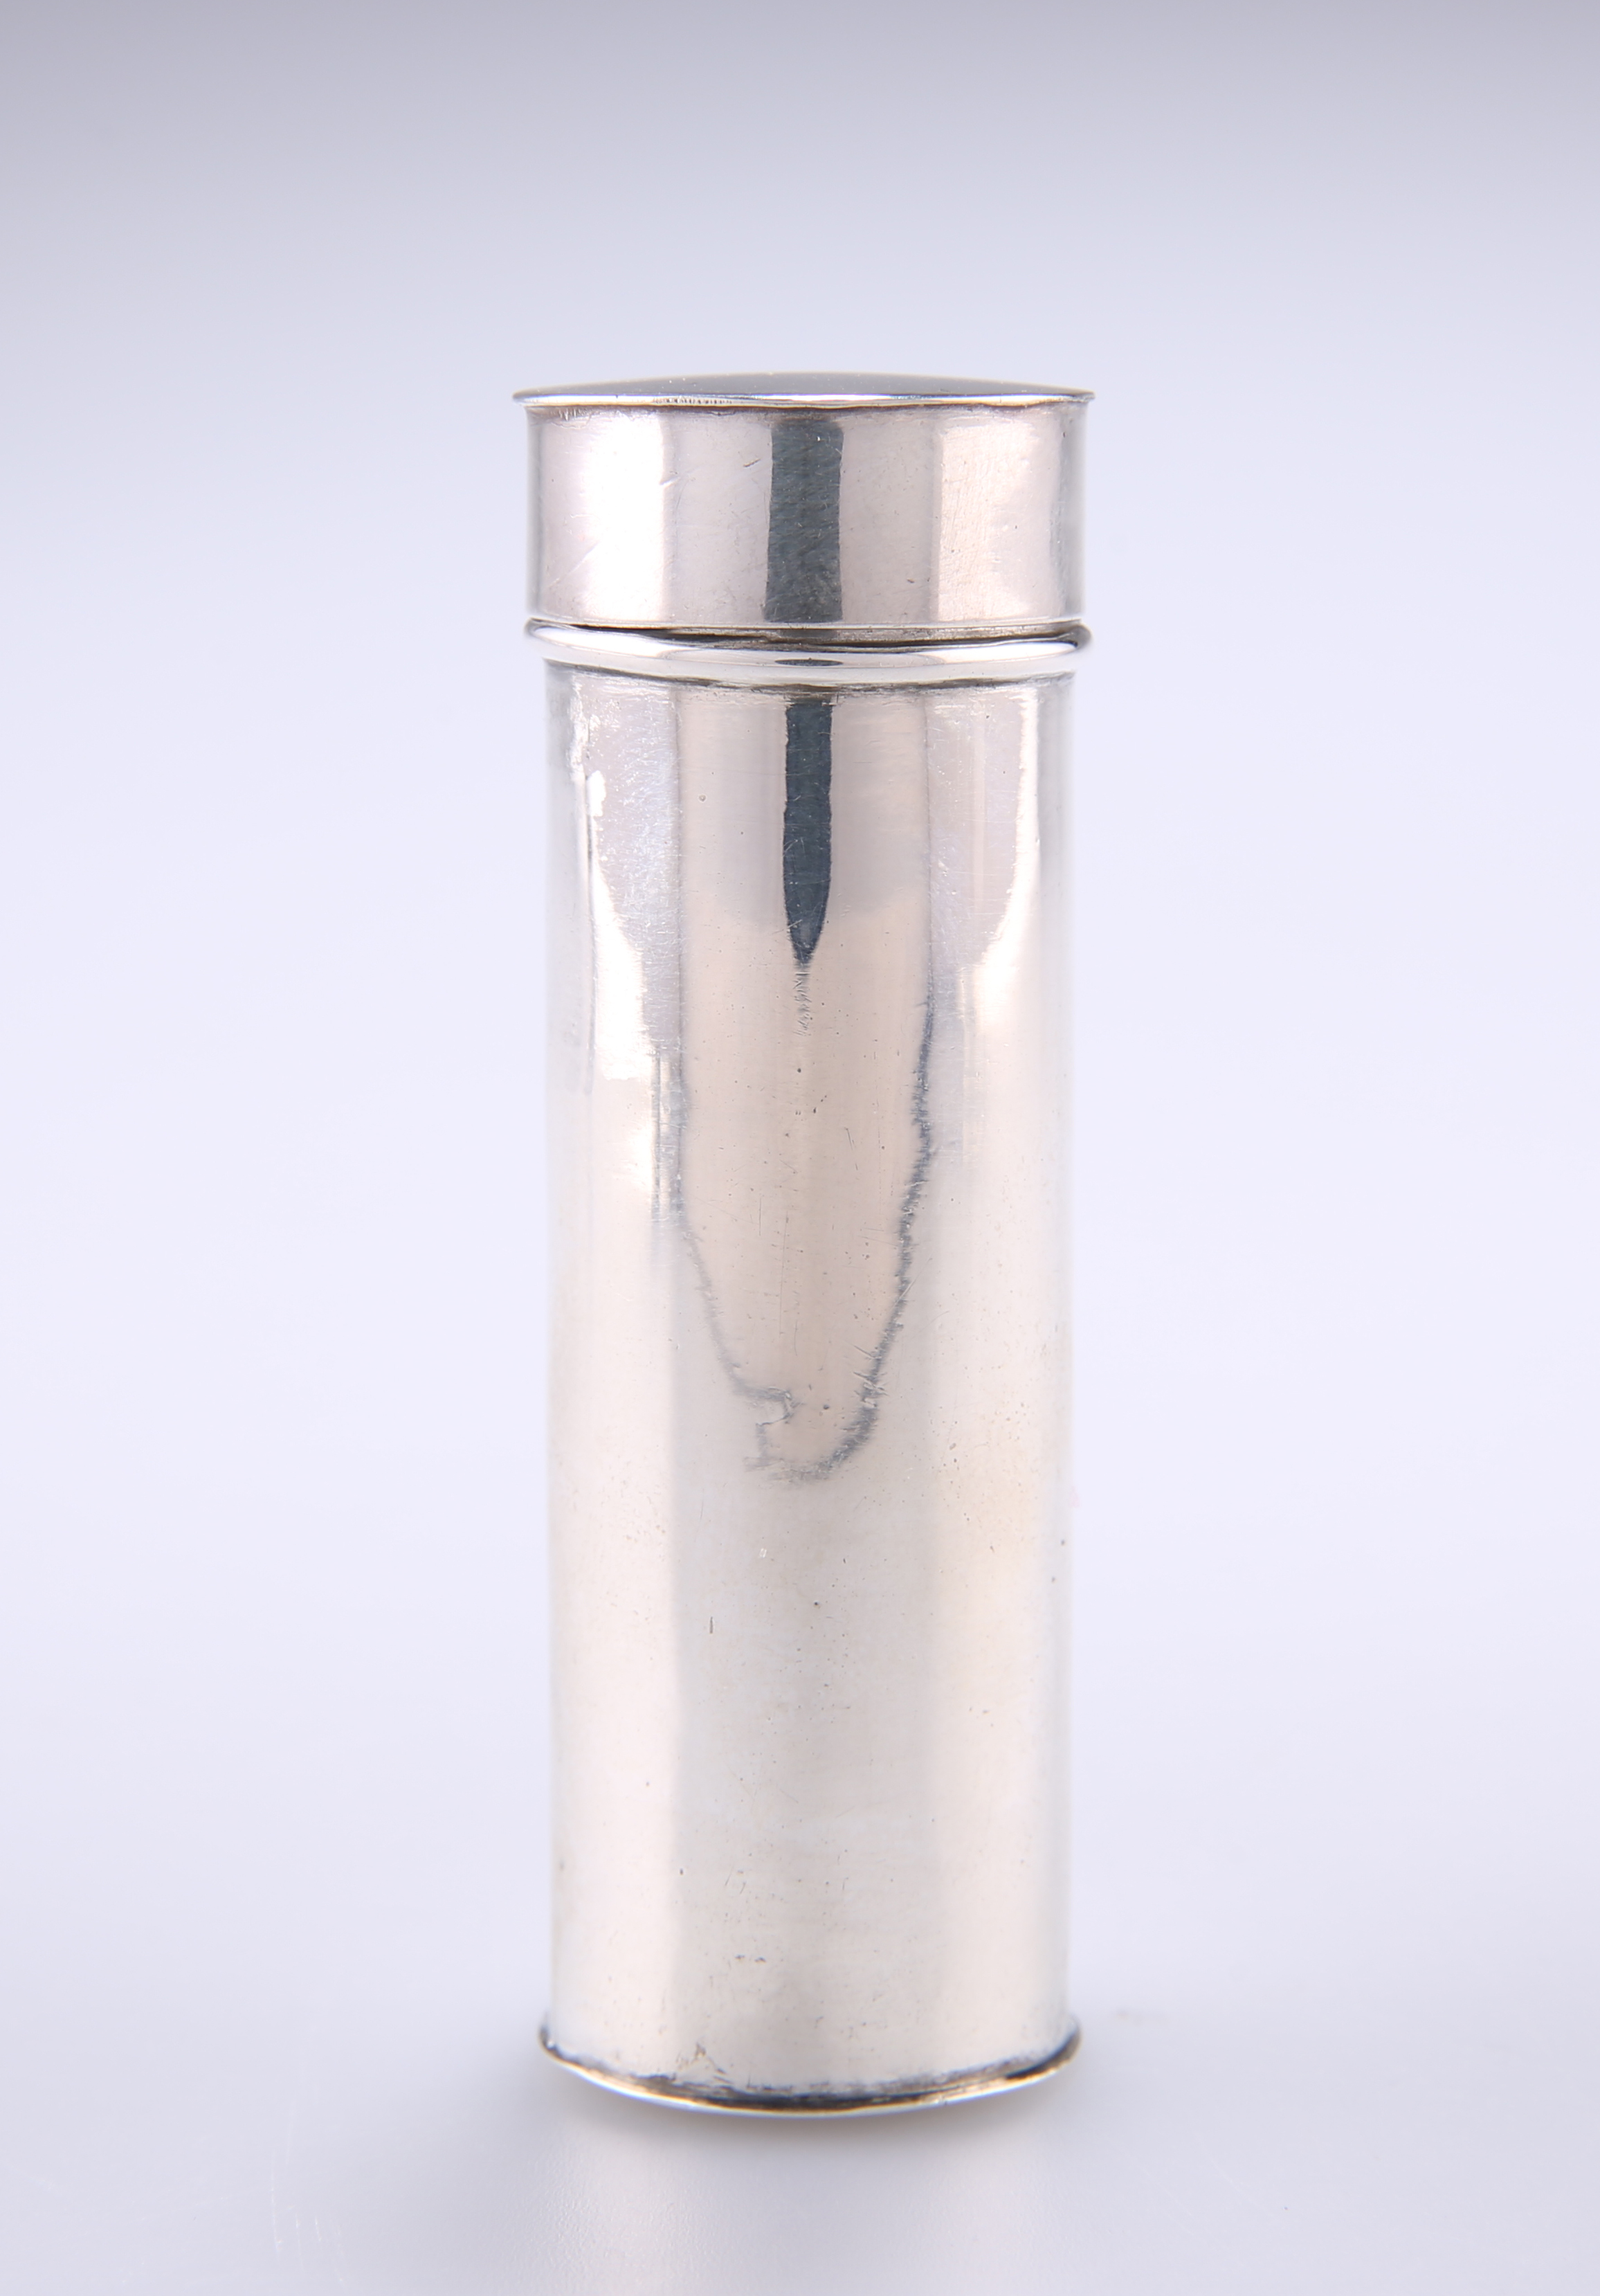 A NUTMEG GRATER TUBE HOLDER, the white metal tube of cylindrical form with removable lid, containing - Image 2 of 2